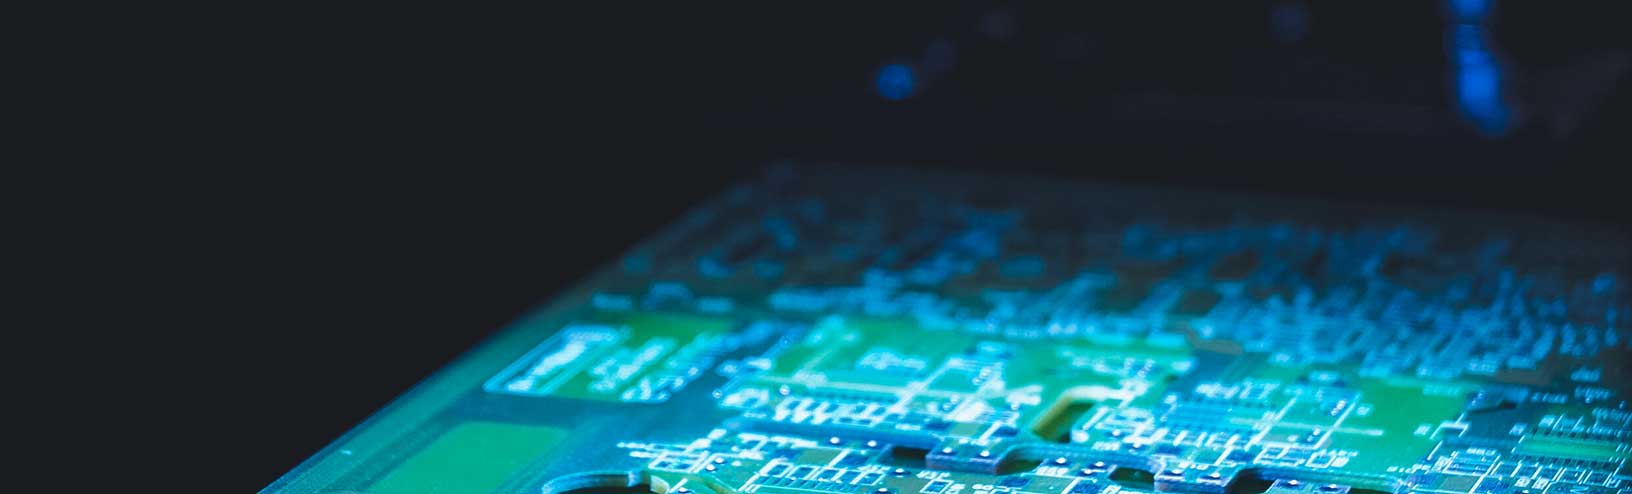 Inspection of an electronic printed circuit board (PCB) using Hexagon’s non-contact inspection solutions for electronics 